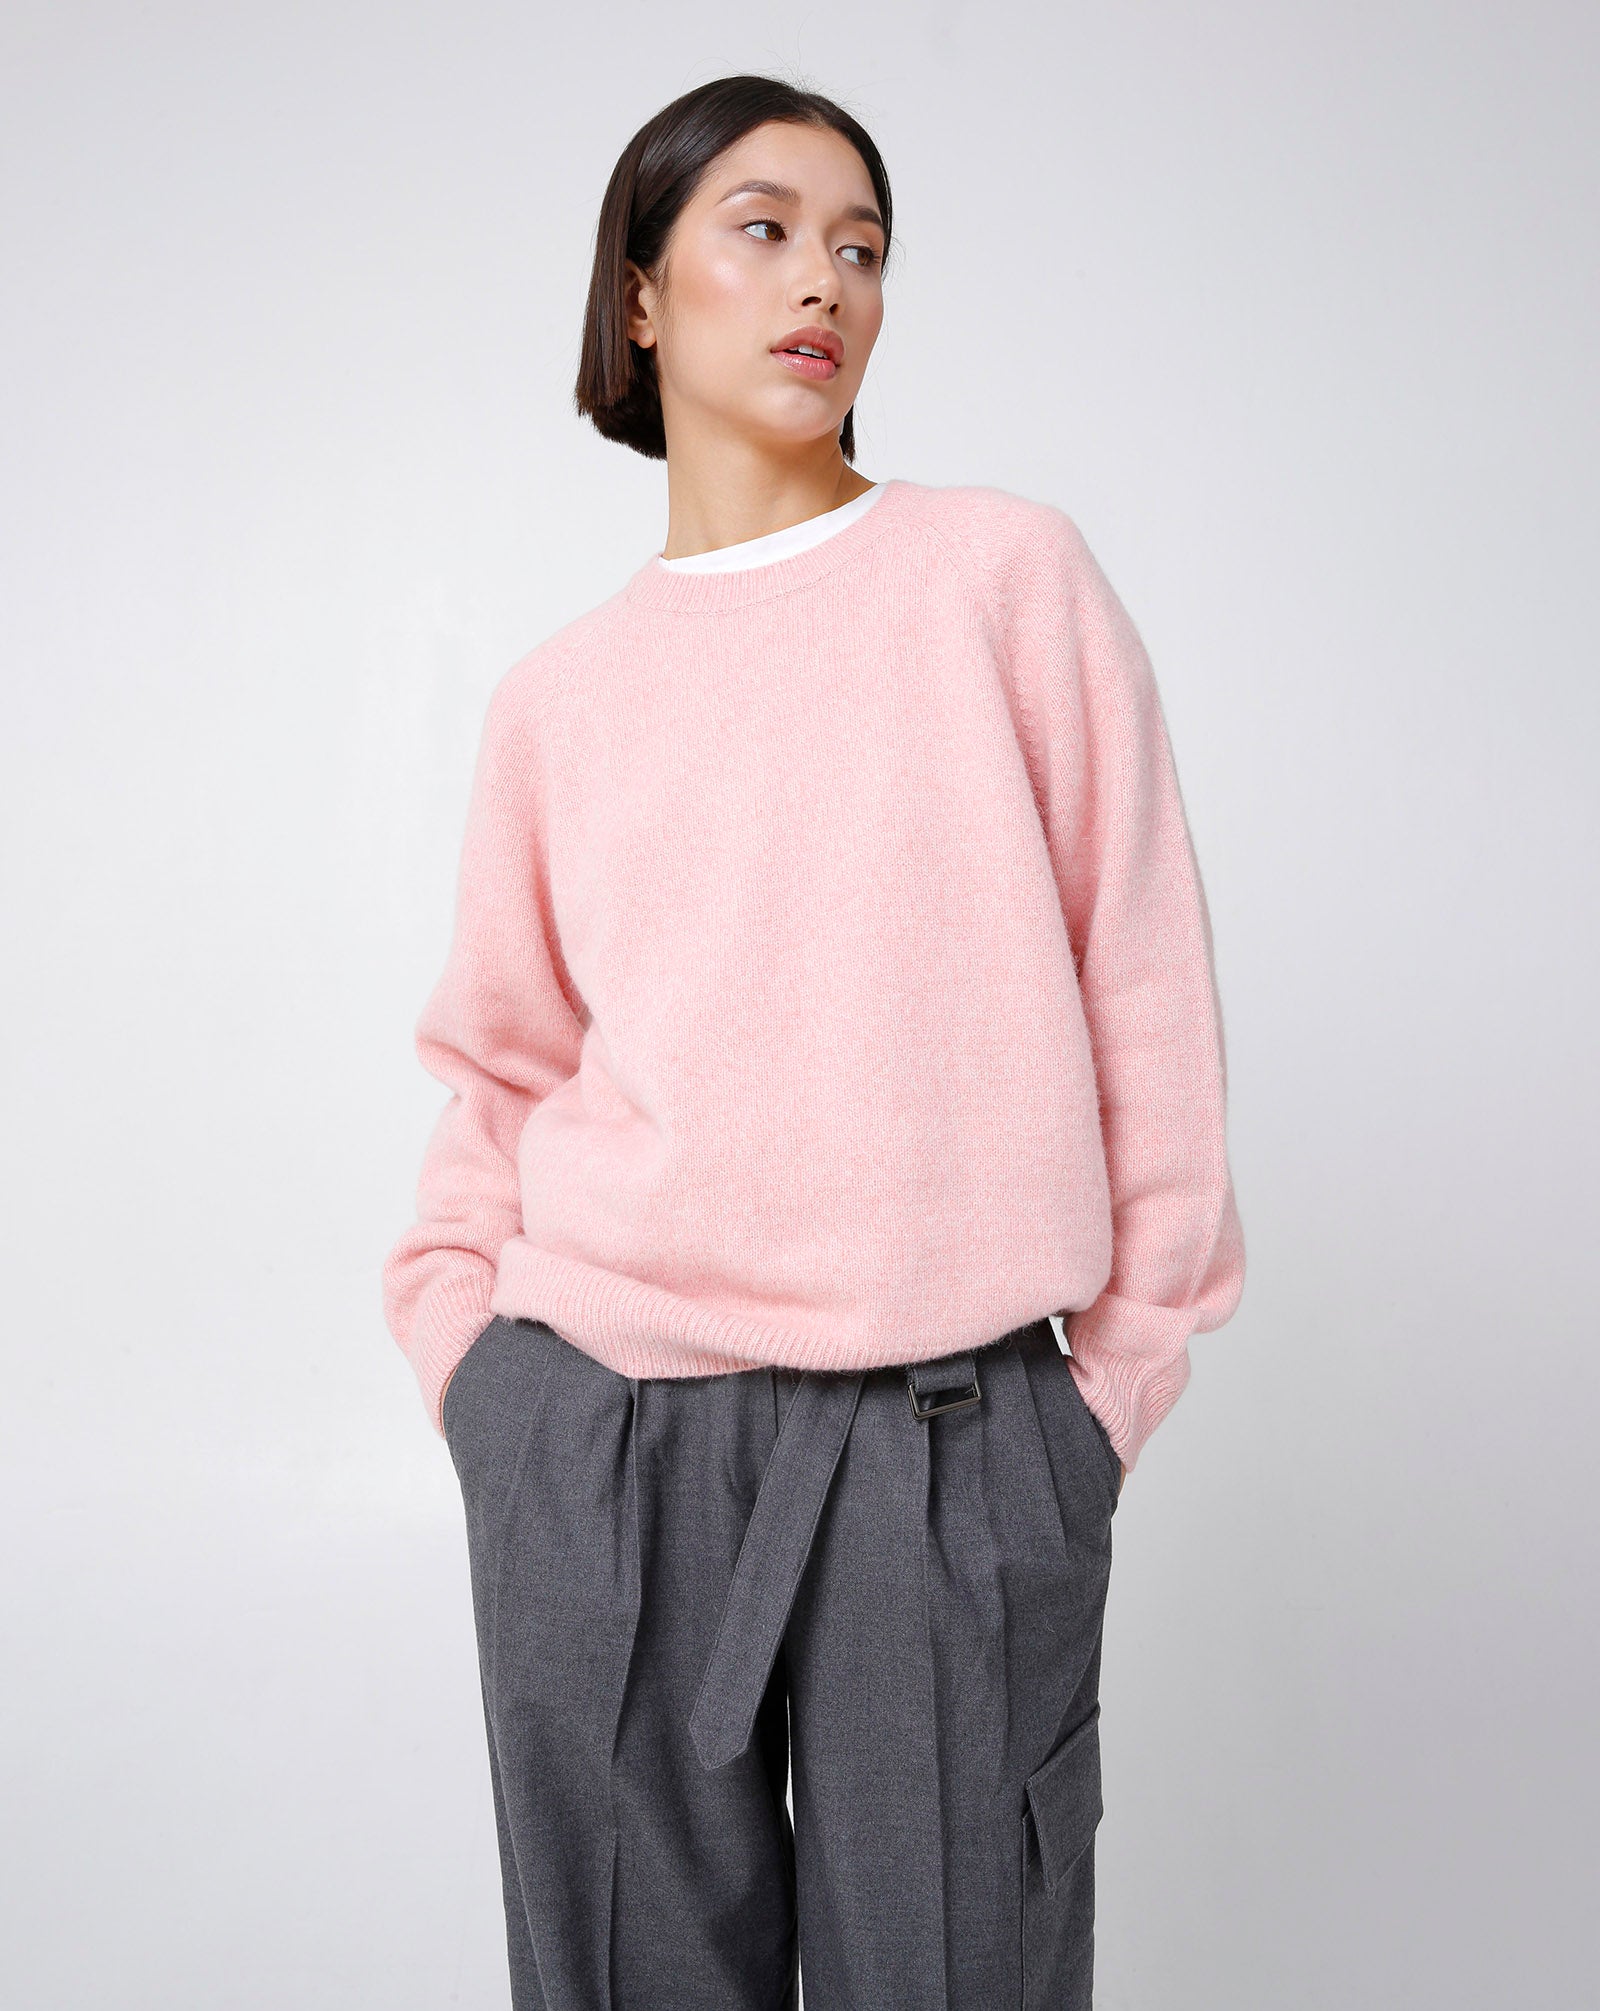 Wool sweater from Dunst